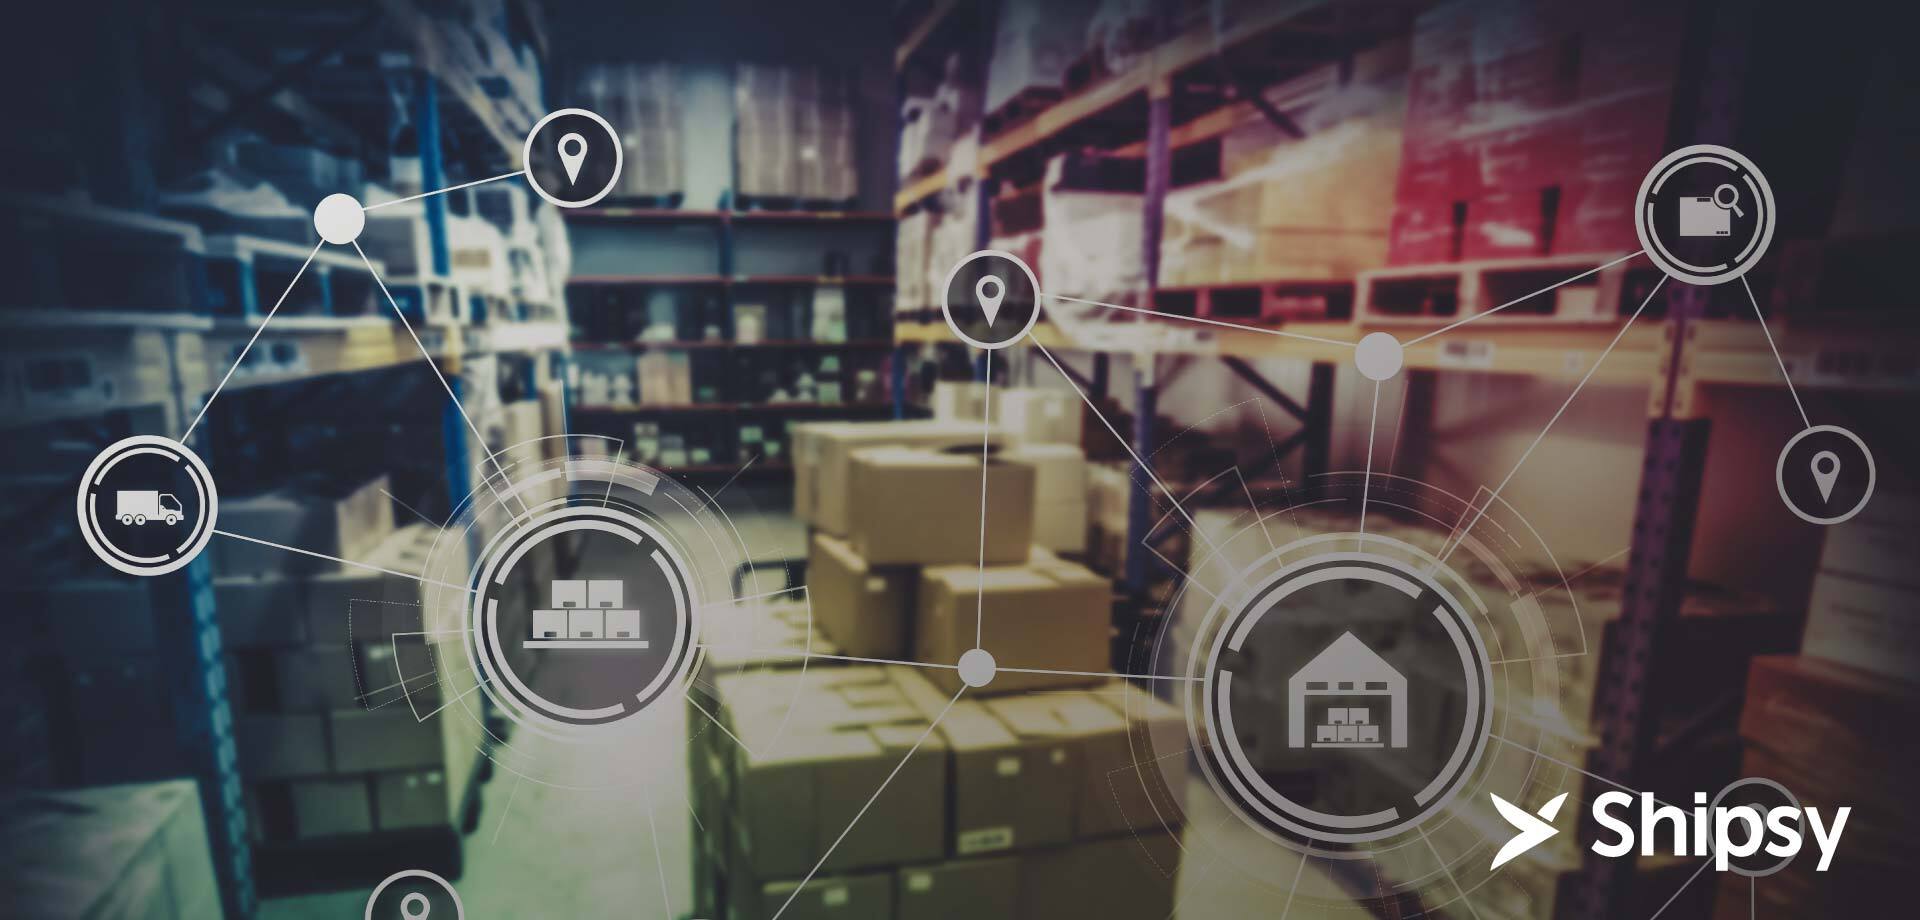 4 Things Logistics Leaders Need To Consider To Realize The Full Potential of Big Data Analytics